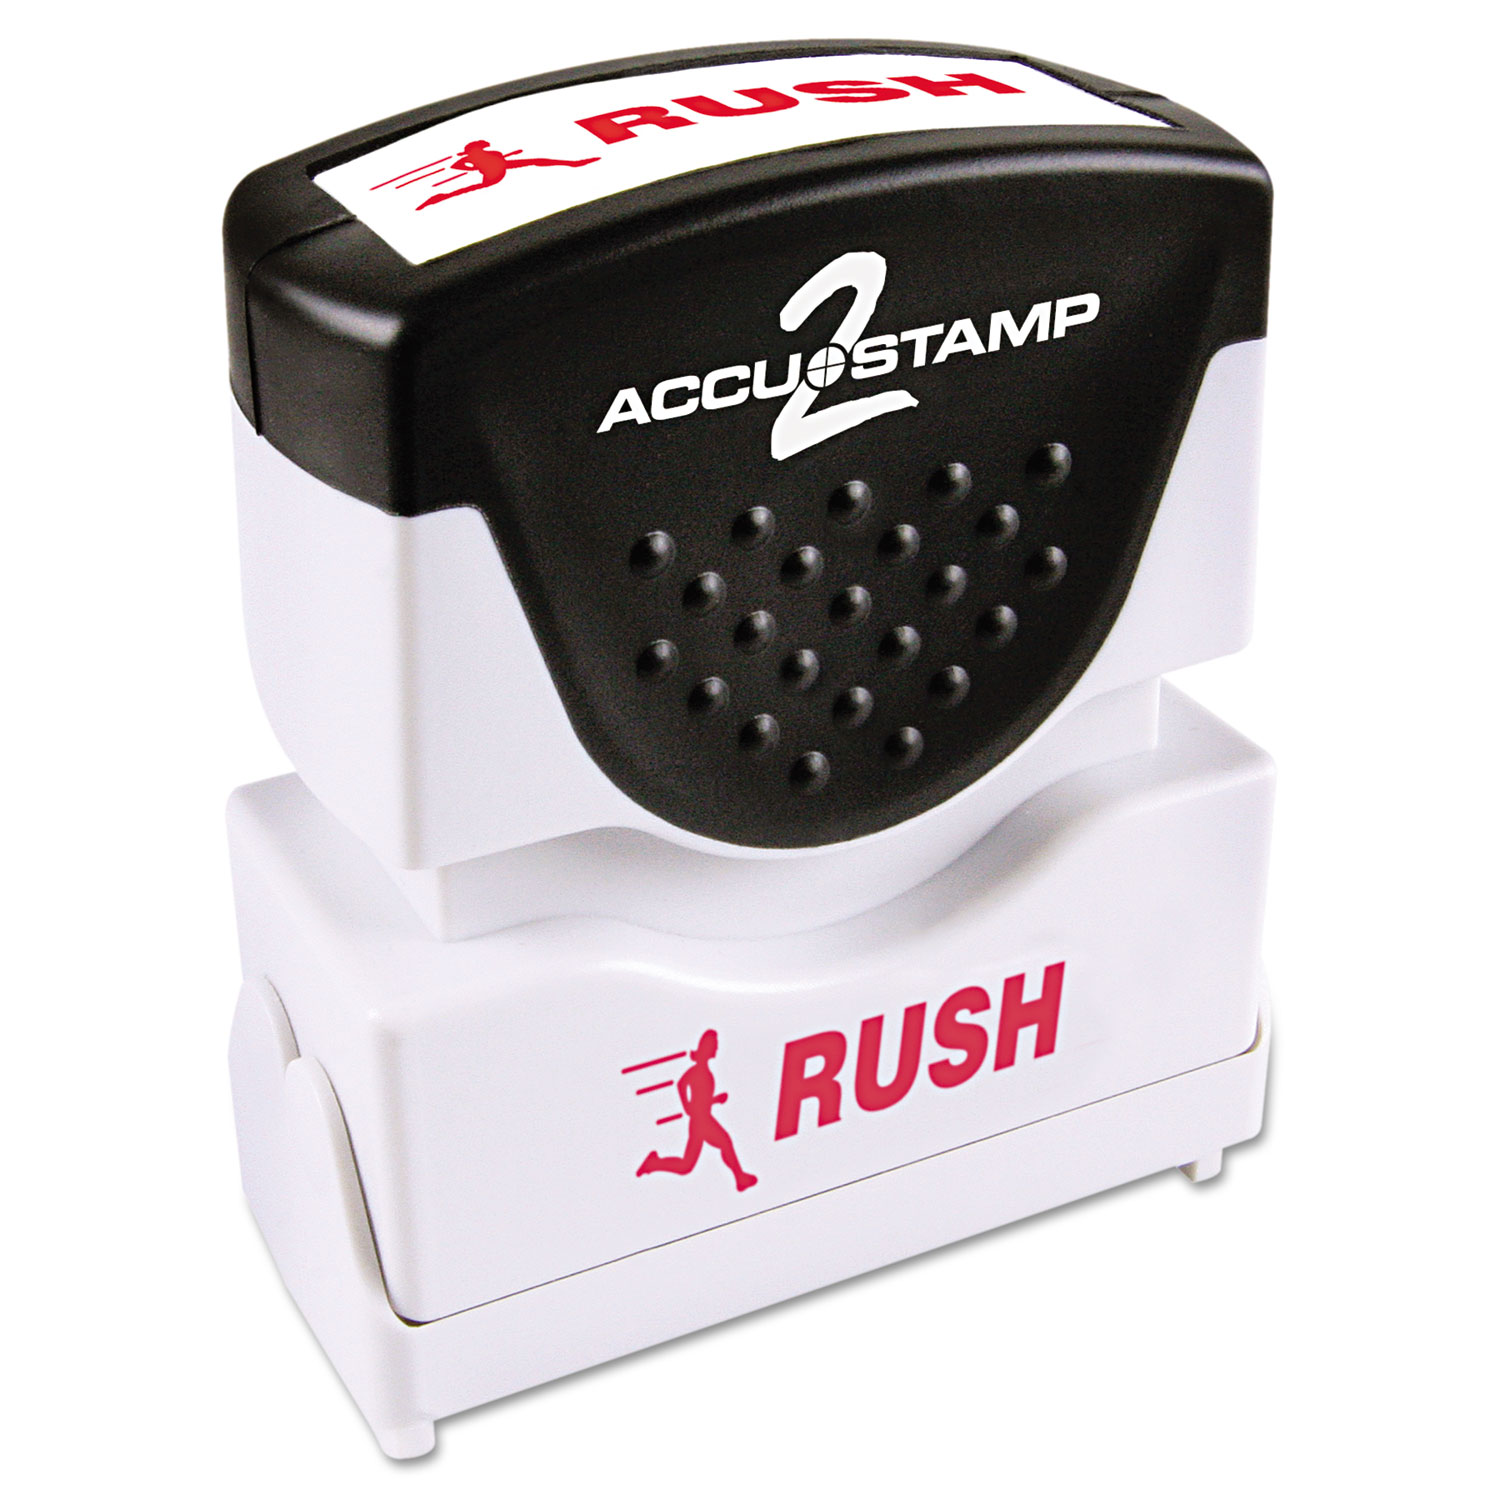  ACCUSTAMP2 035590 Pre-Inked Shutter Stamp, Red, RUSH, 1 5/8 x 1/2 (COS035590) 